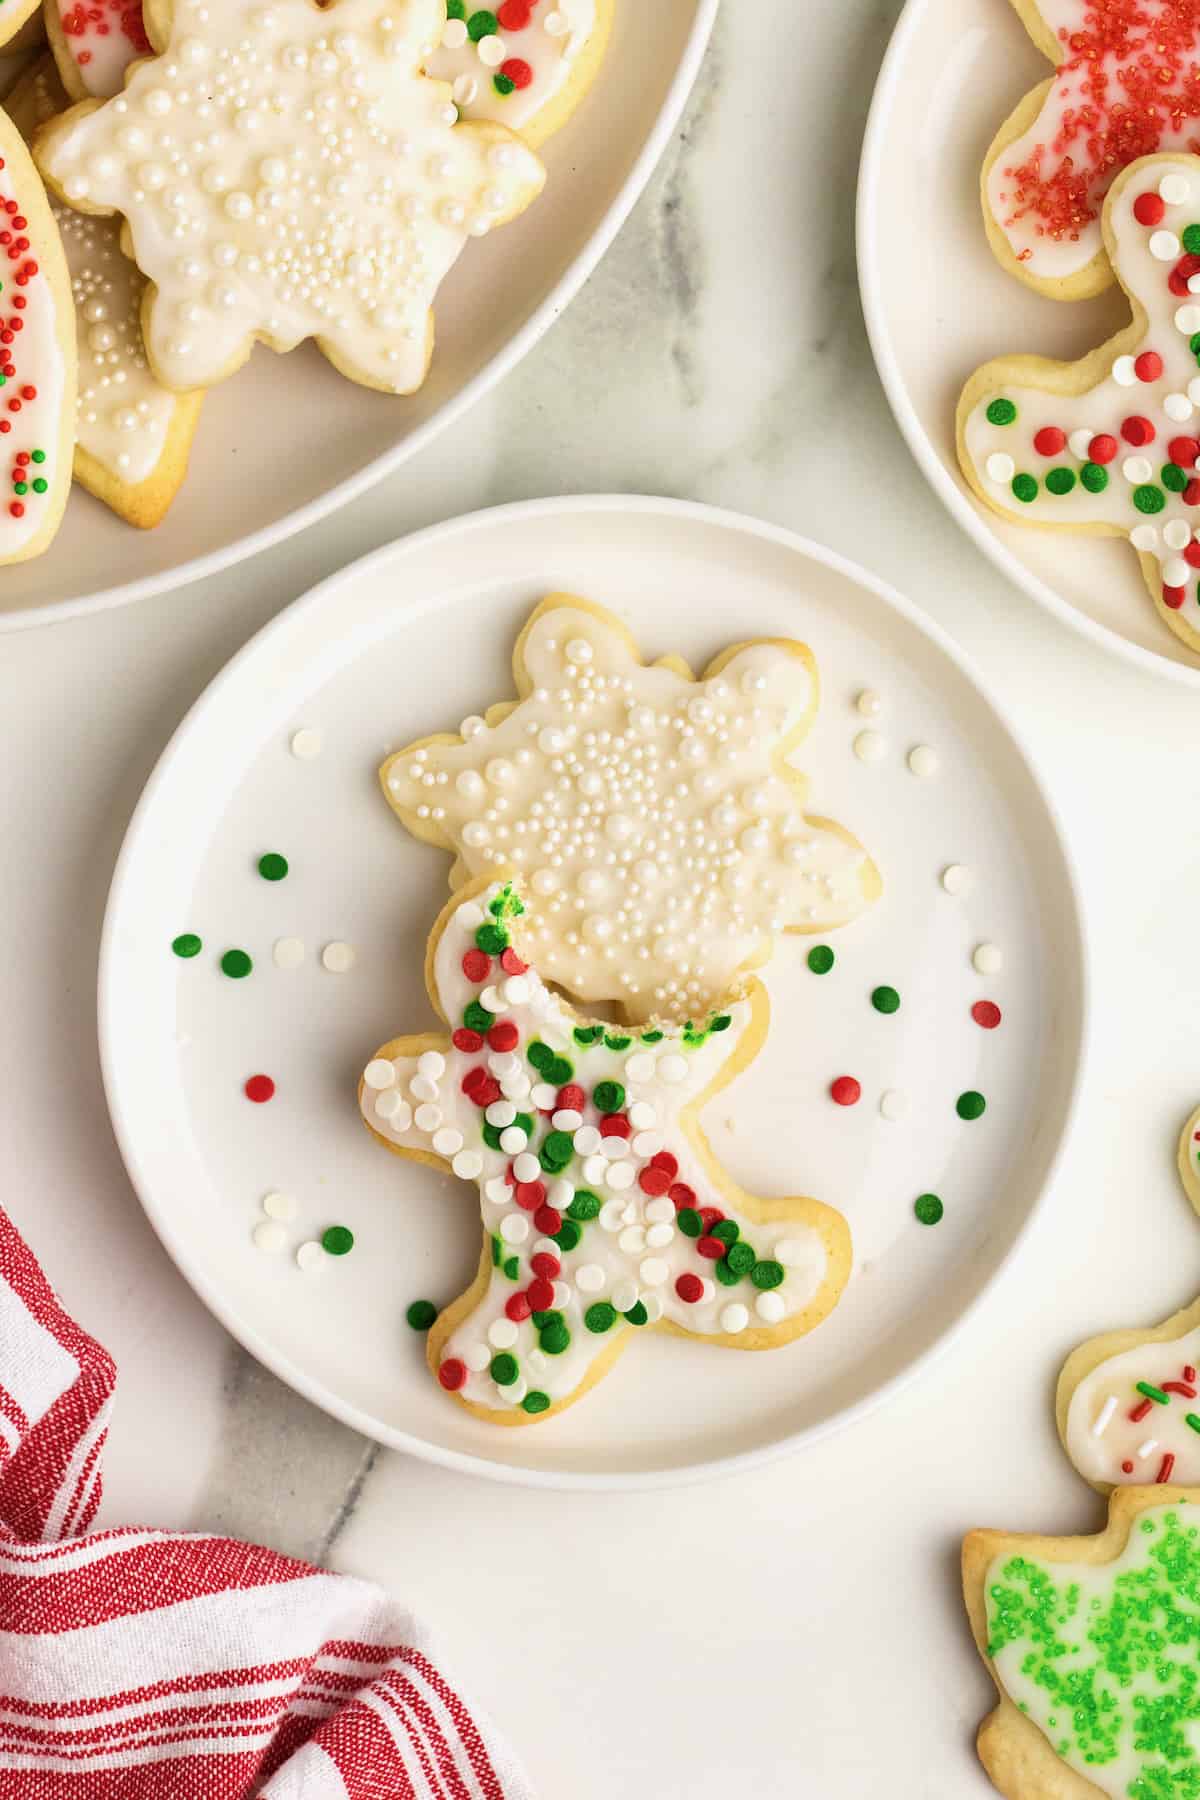 A white plate with two ice sugar cookies on it. One is a star with shite sprinkles and the other is a gingerbread man shape with red, white and green sprinkles. The gingerbread man has a bite out of it.